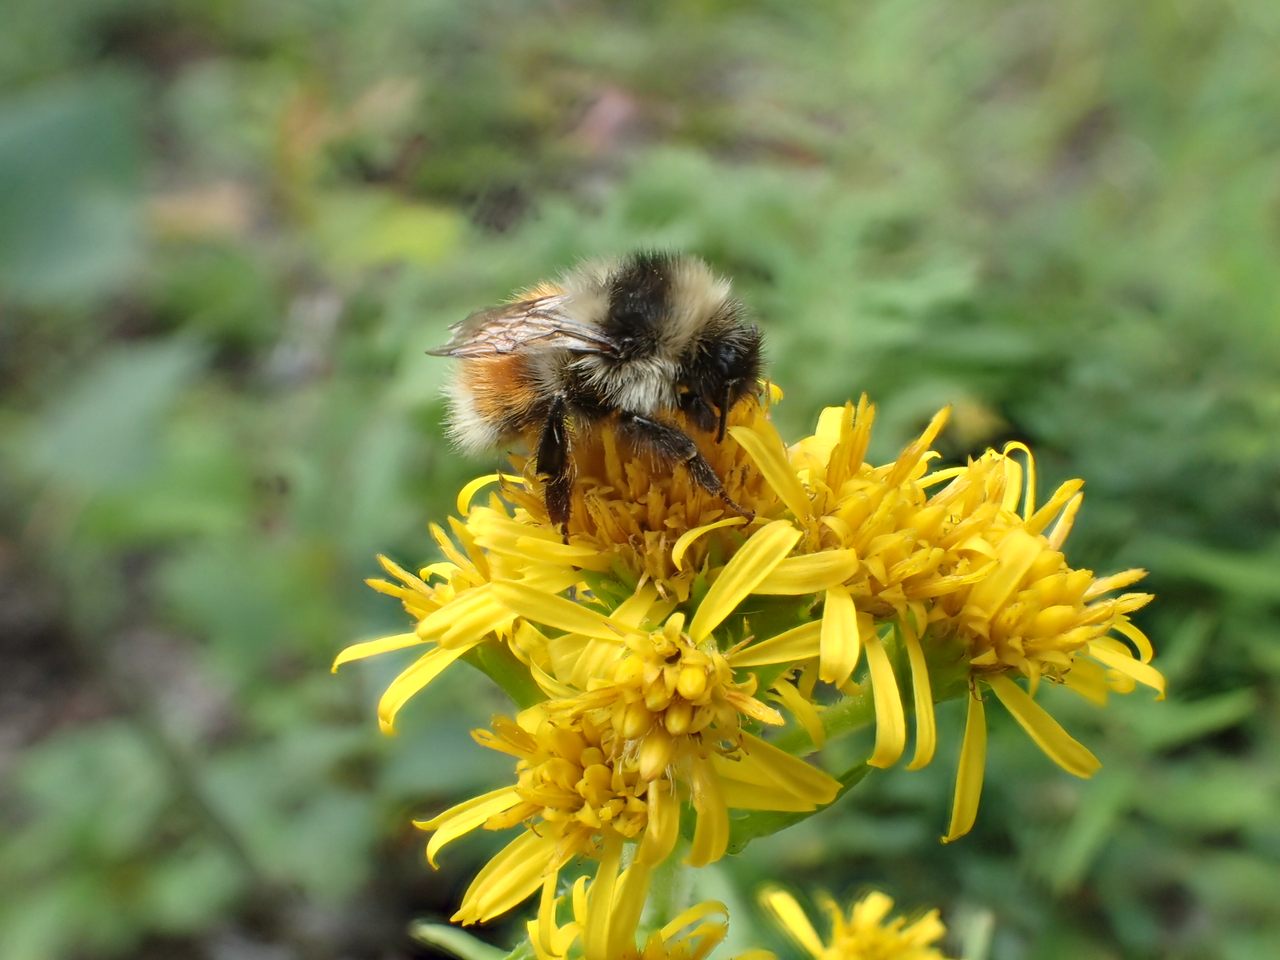 <em>B. sylvicola</em>, the forest bumblebee, is found in much of Canada and the far western reaches of the United States, including Alaska.